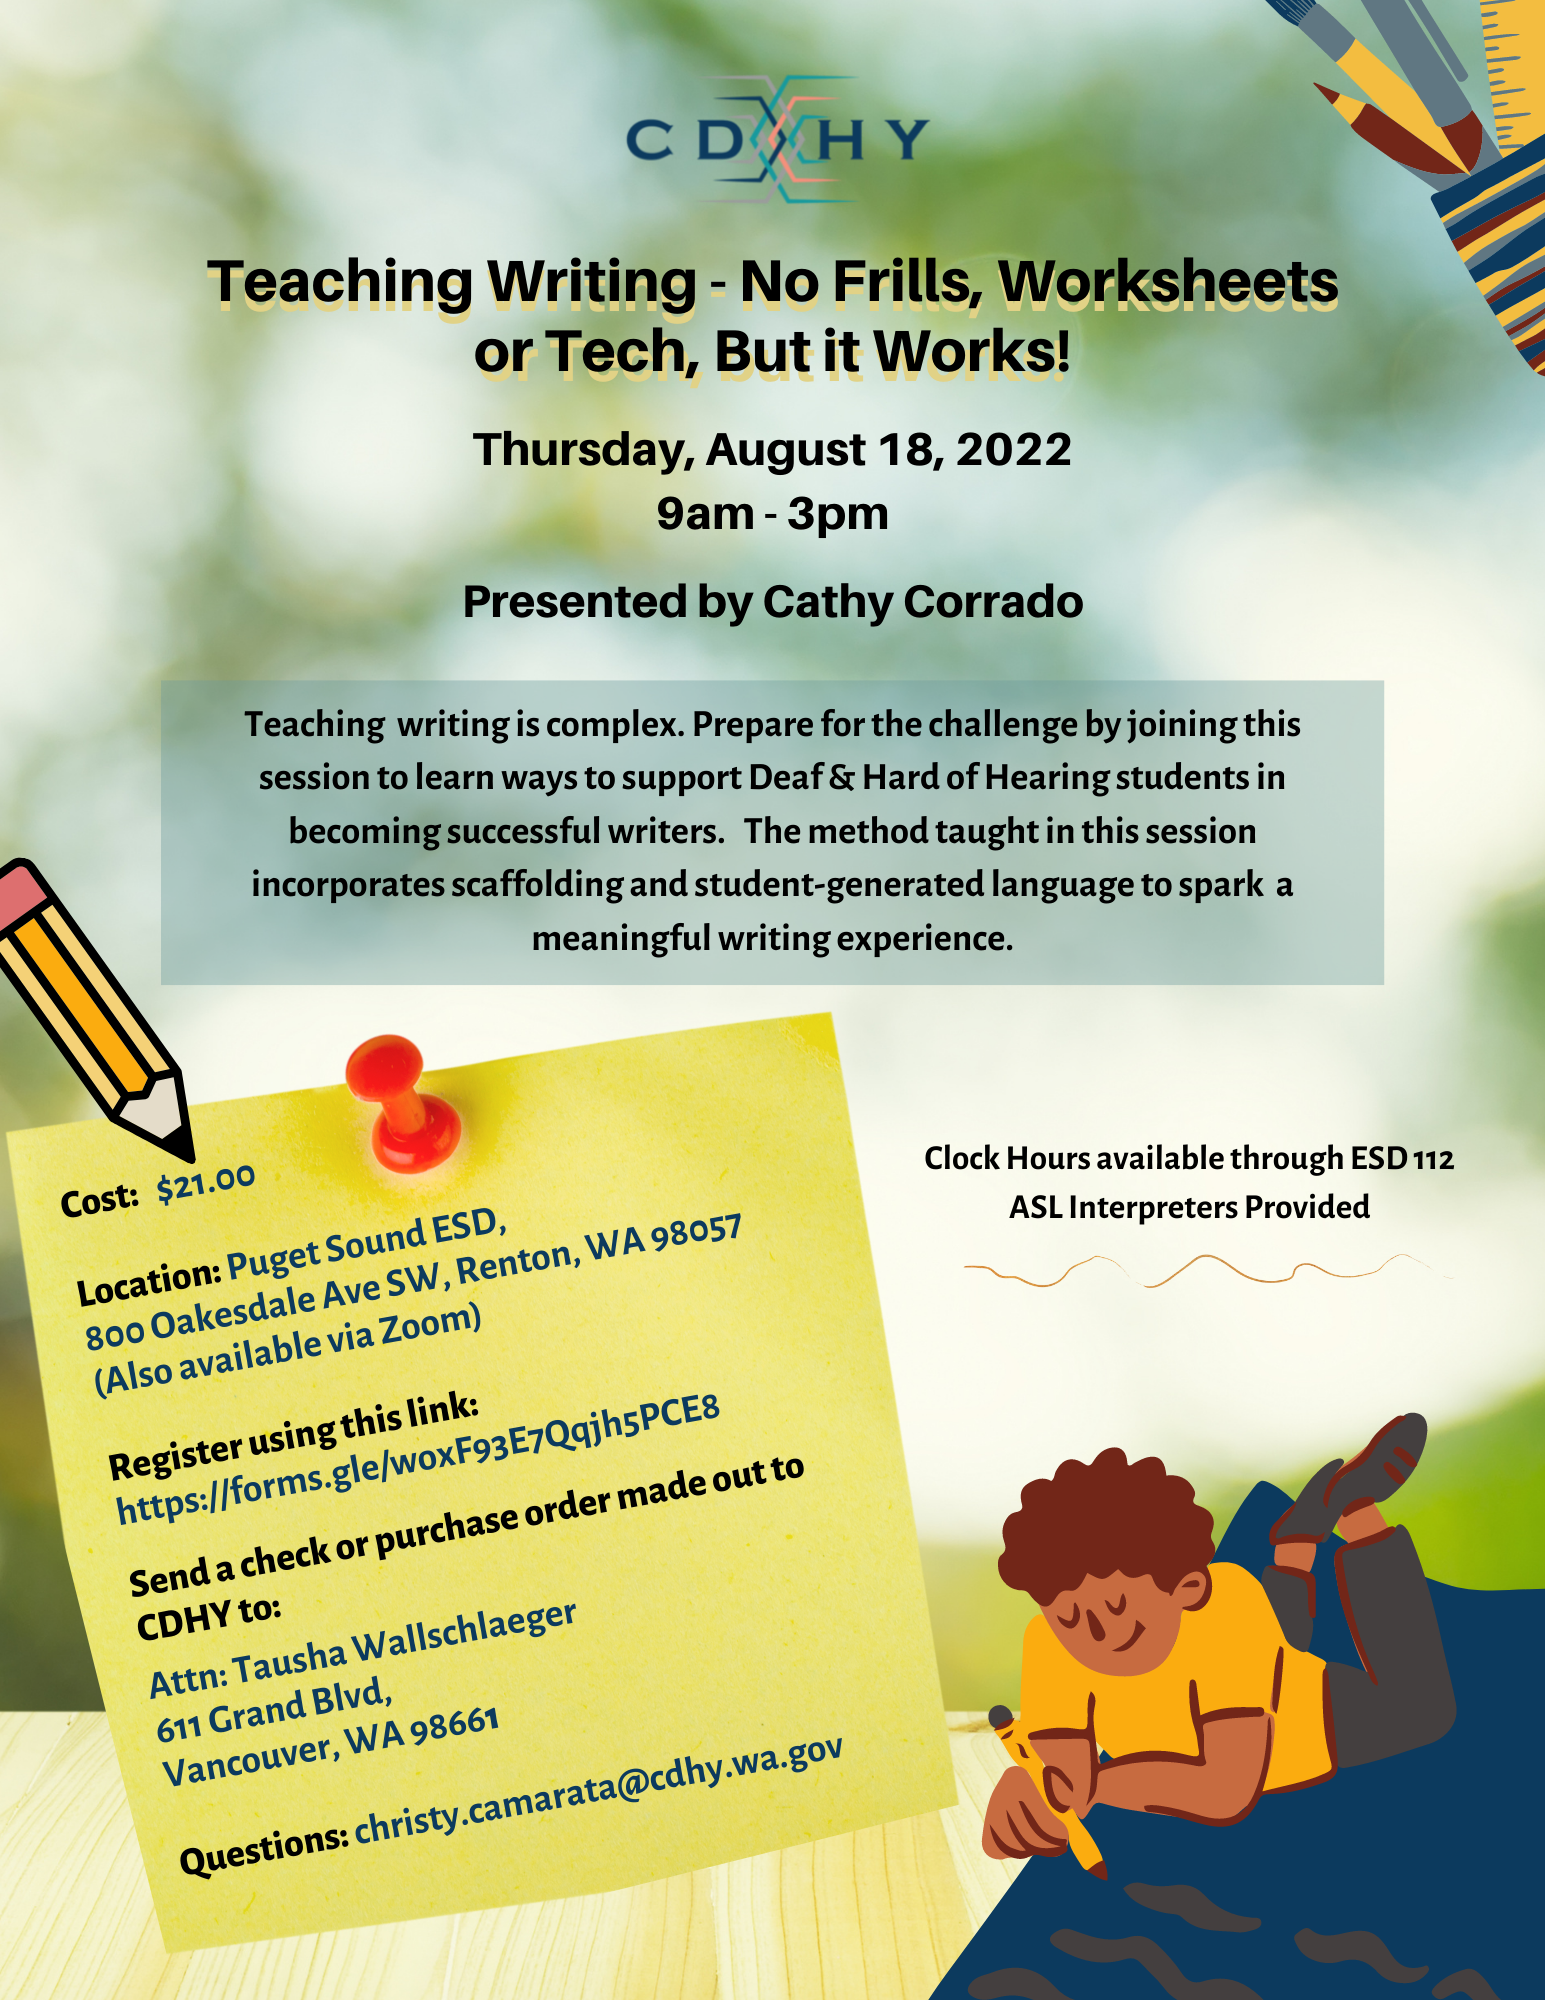 Teaching Writing - No Frills, Worksheets or Tech, But it Works! @ Puget Sound ESD